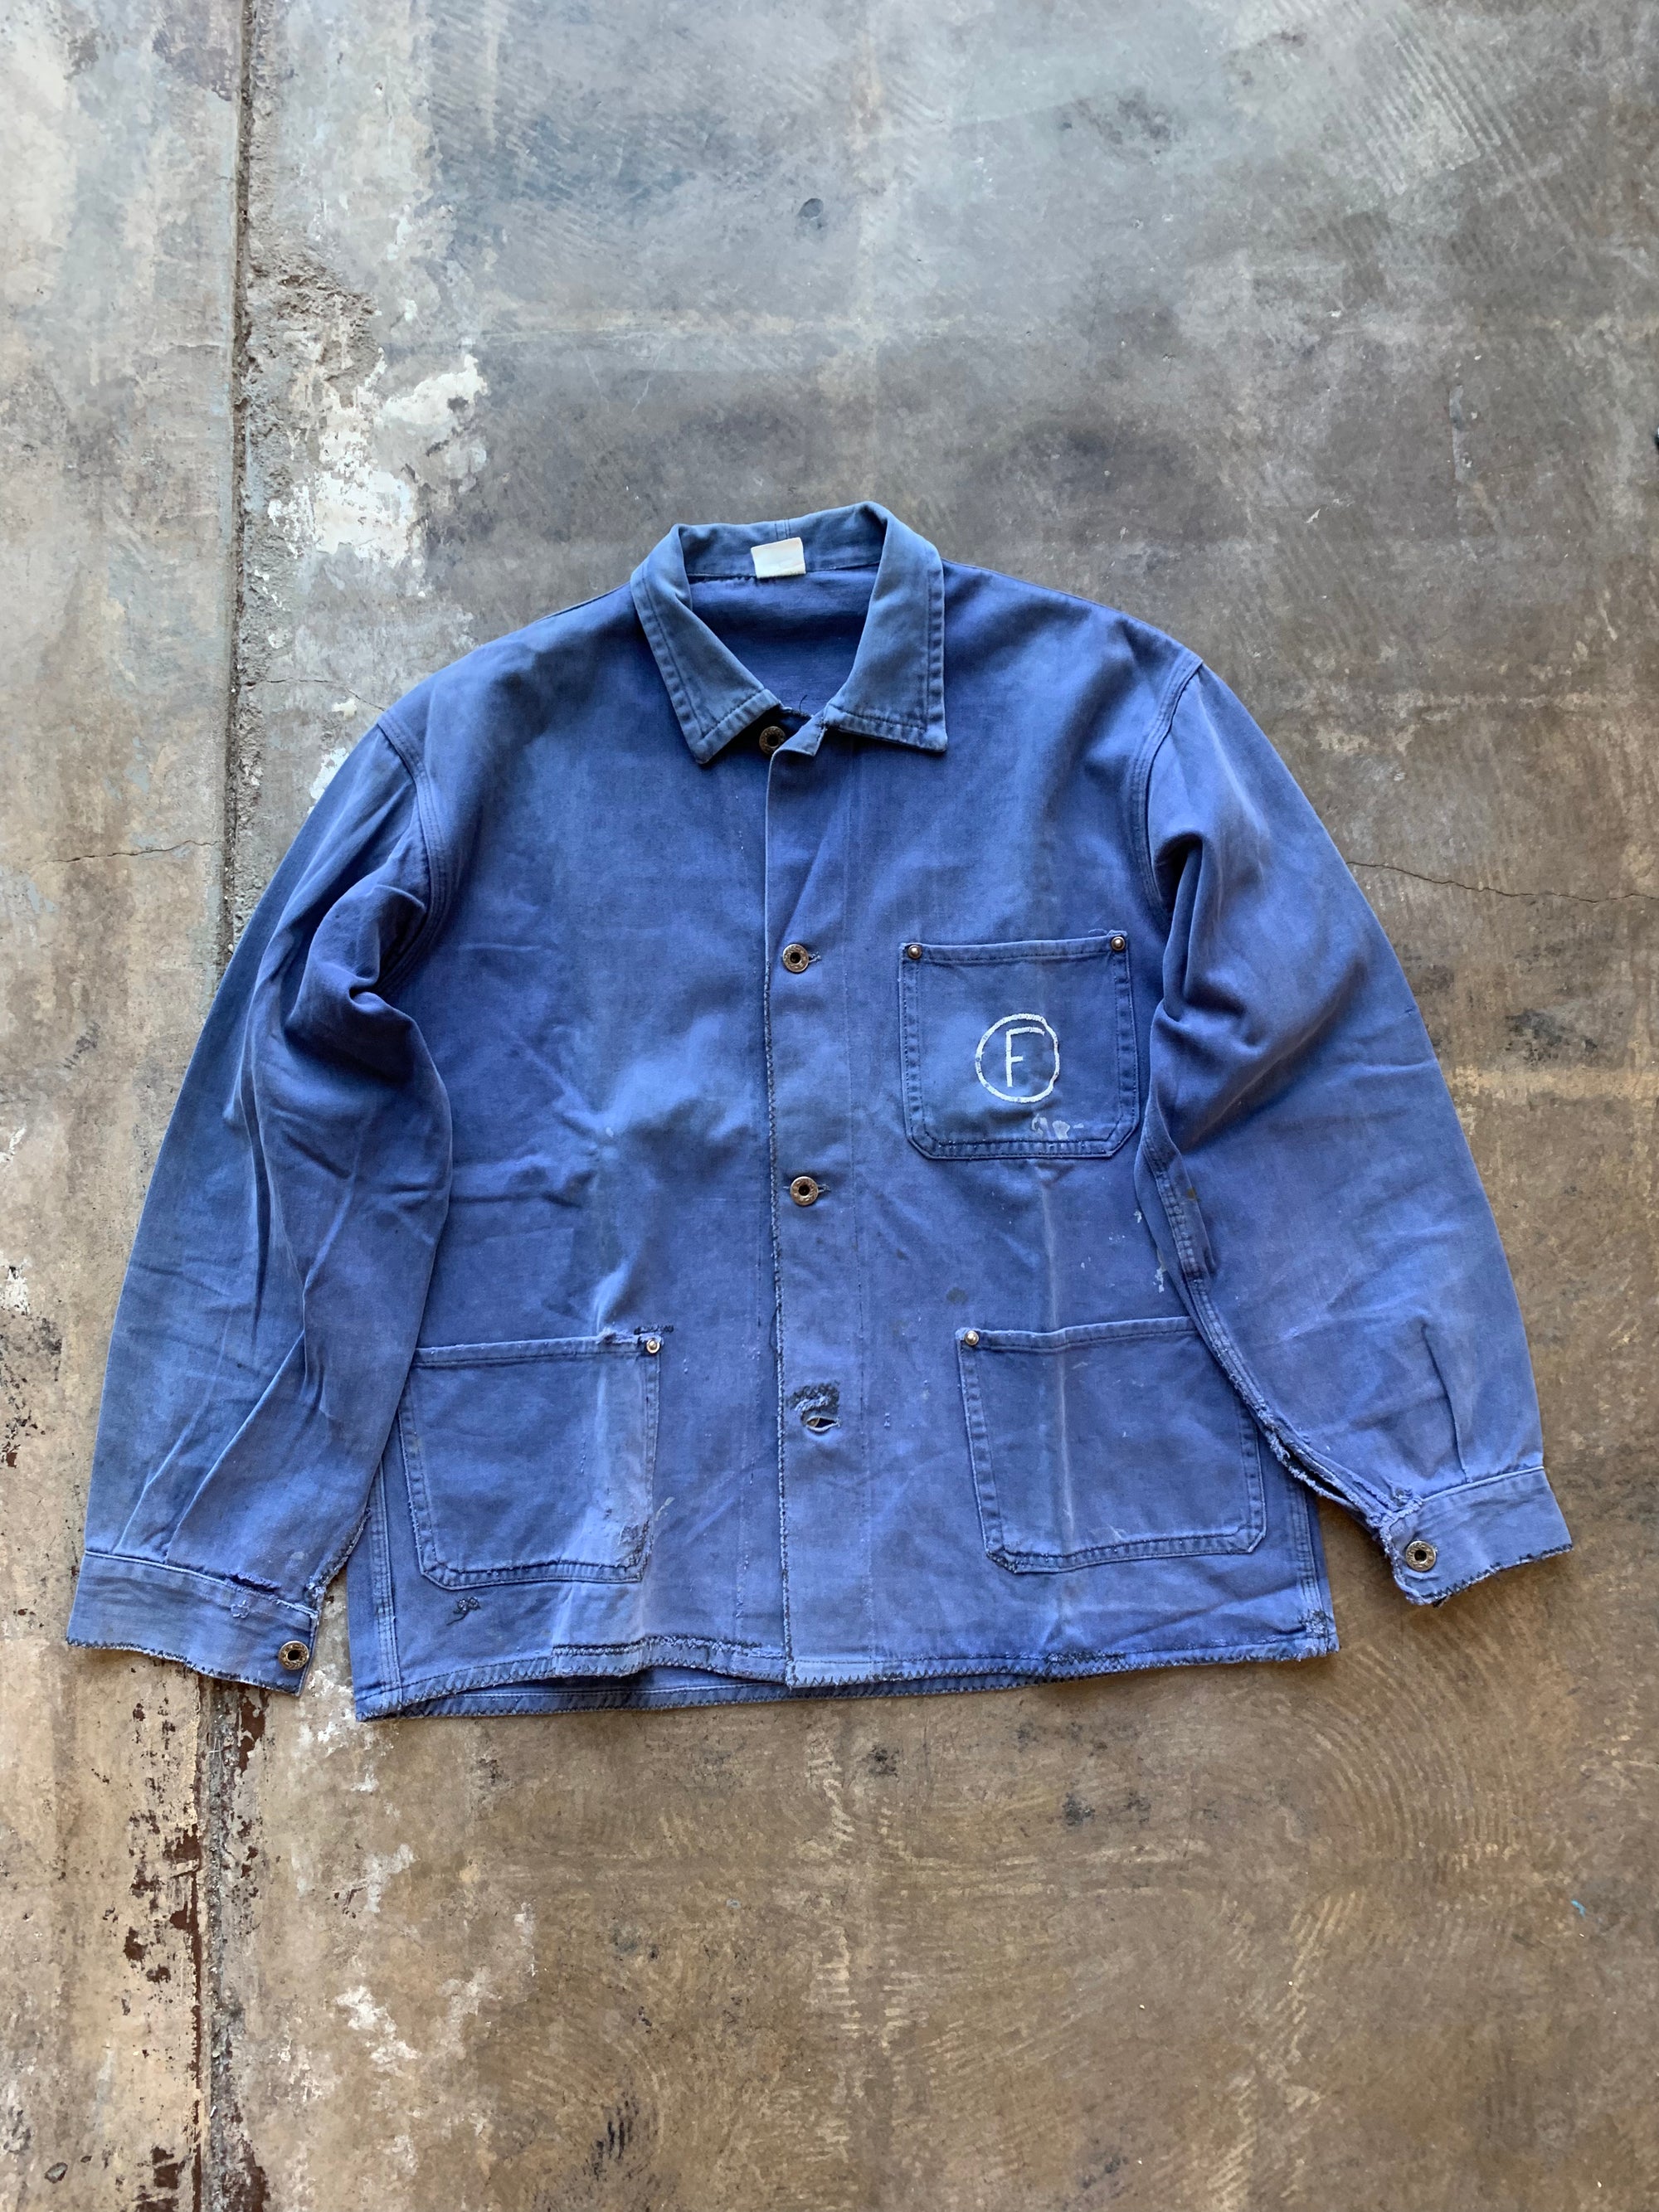 Vintage Blue Chore Coat with Handsewn "F"